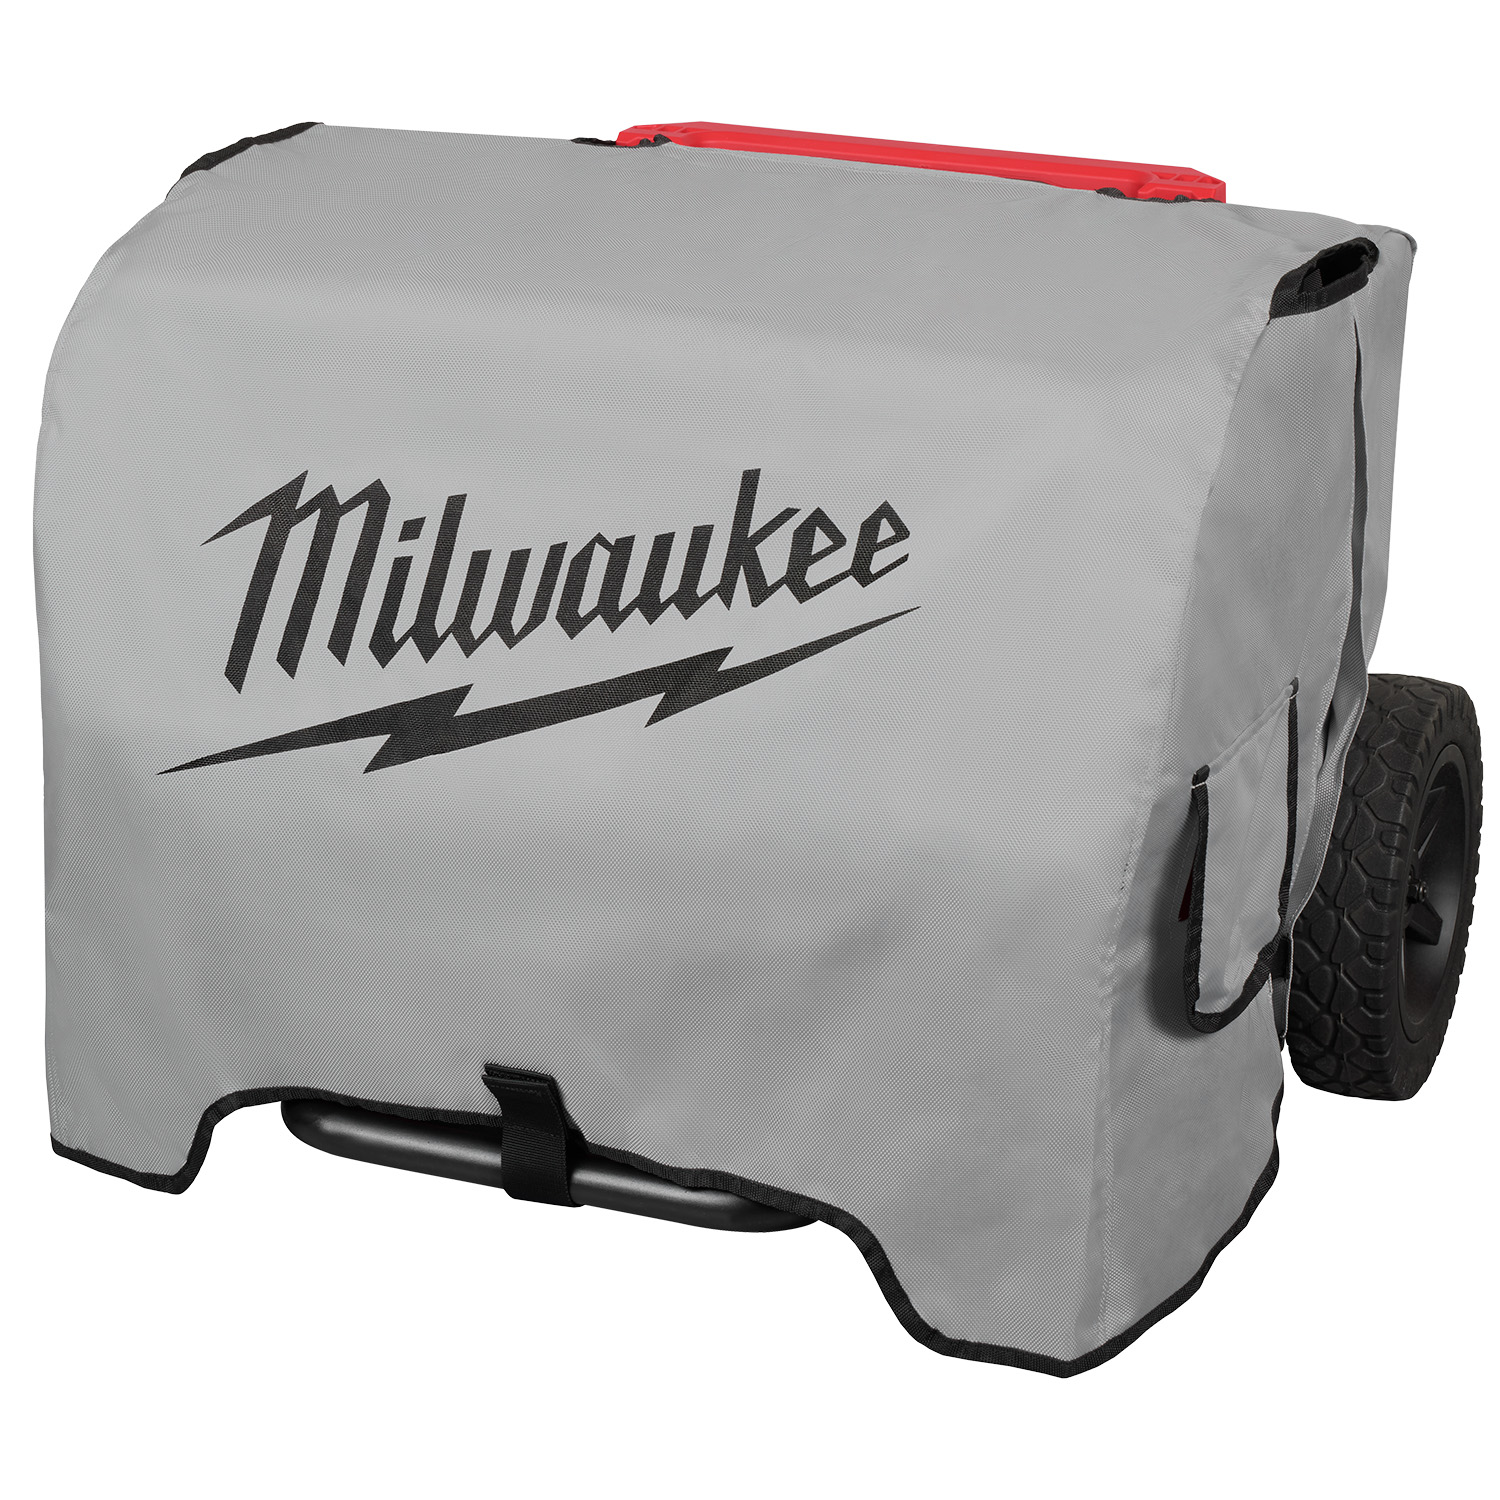 Milwaukee ROLL-ON 7200W/3600W 2.5kWh Power Supply Protective Cover from Columbia Safety